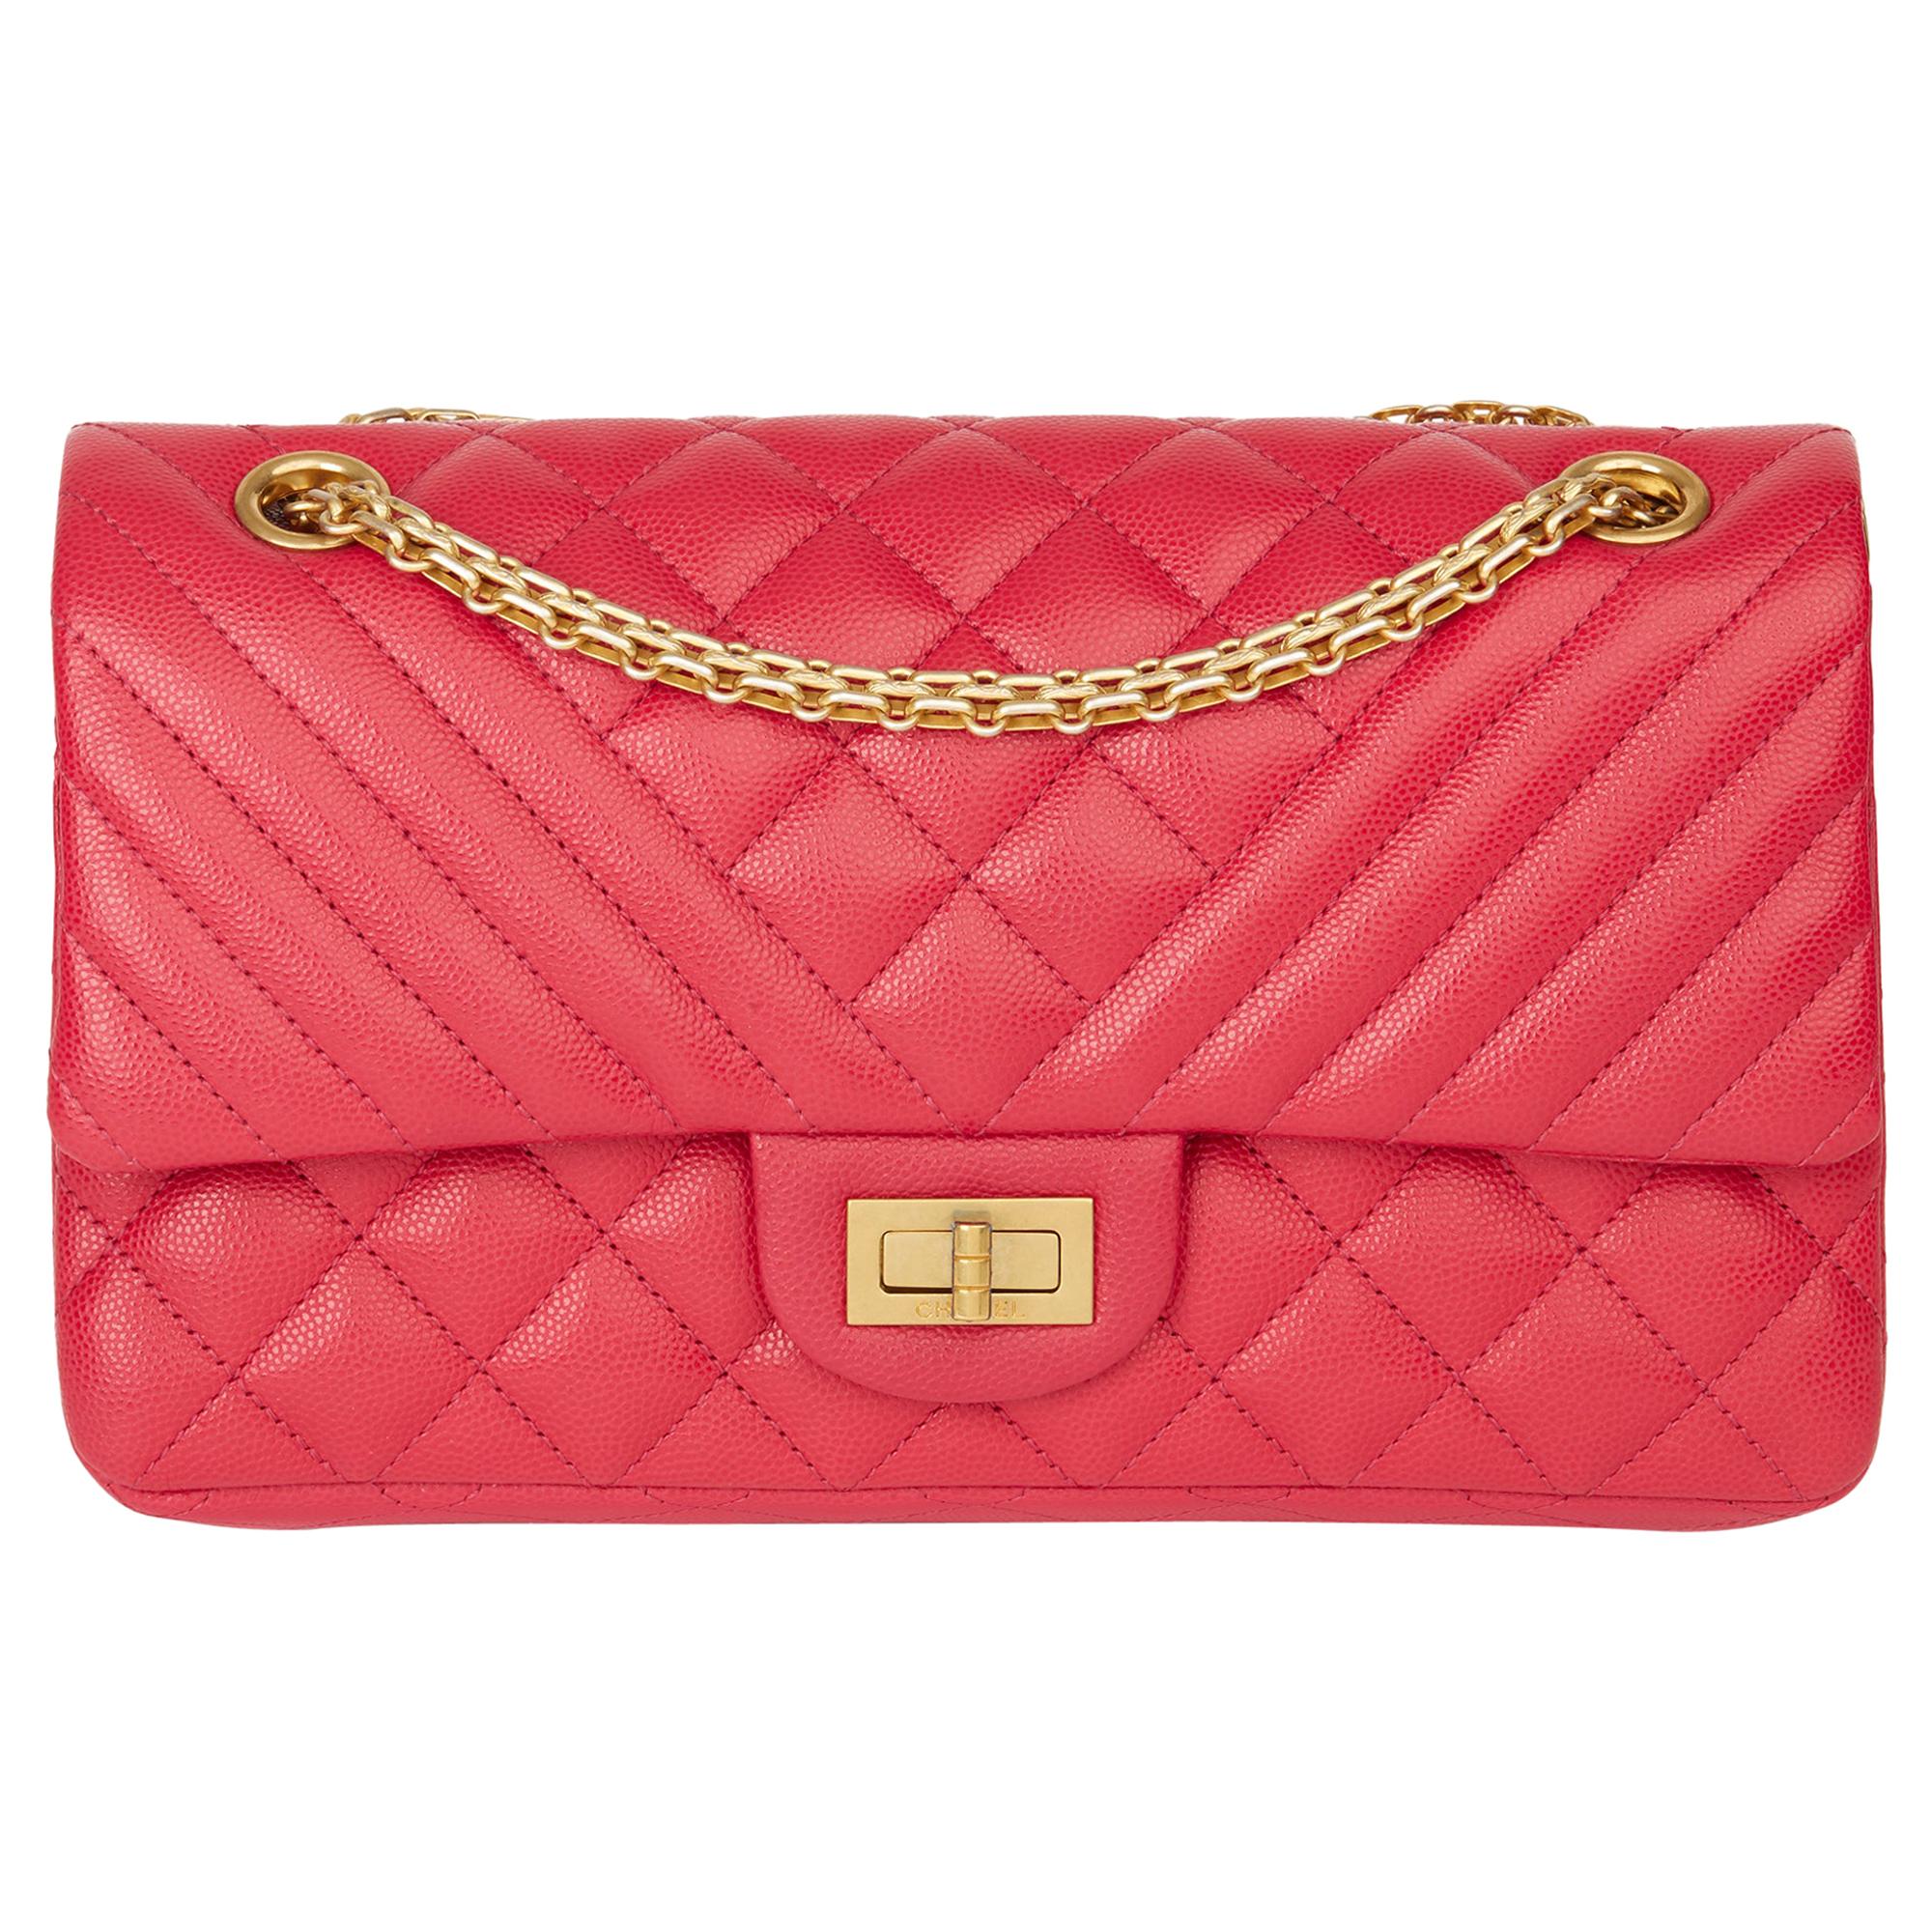 2017 Chanel Magenta Chevron Quilted Caviar Leather 2.55 Reissue Double Flap Bag